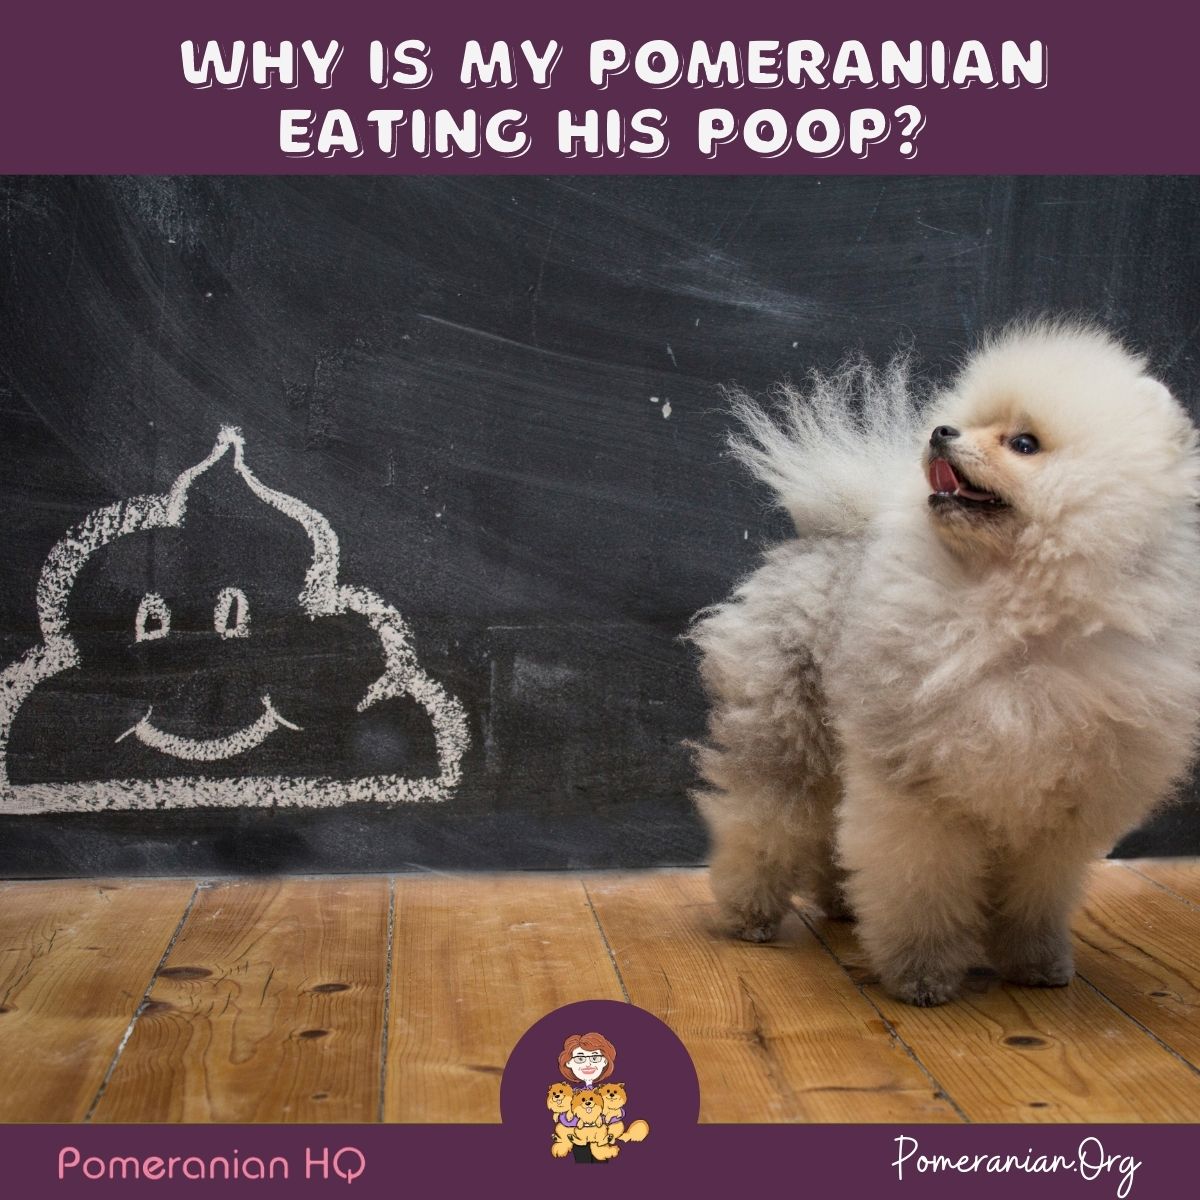 Why is my Pomeranian eating his poop?